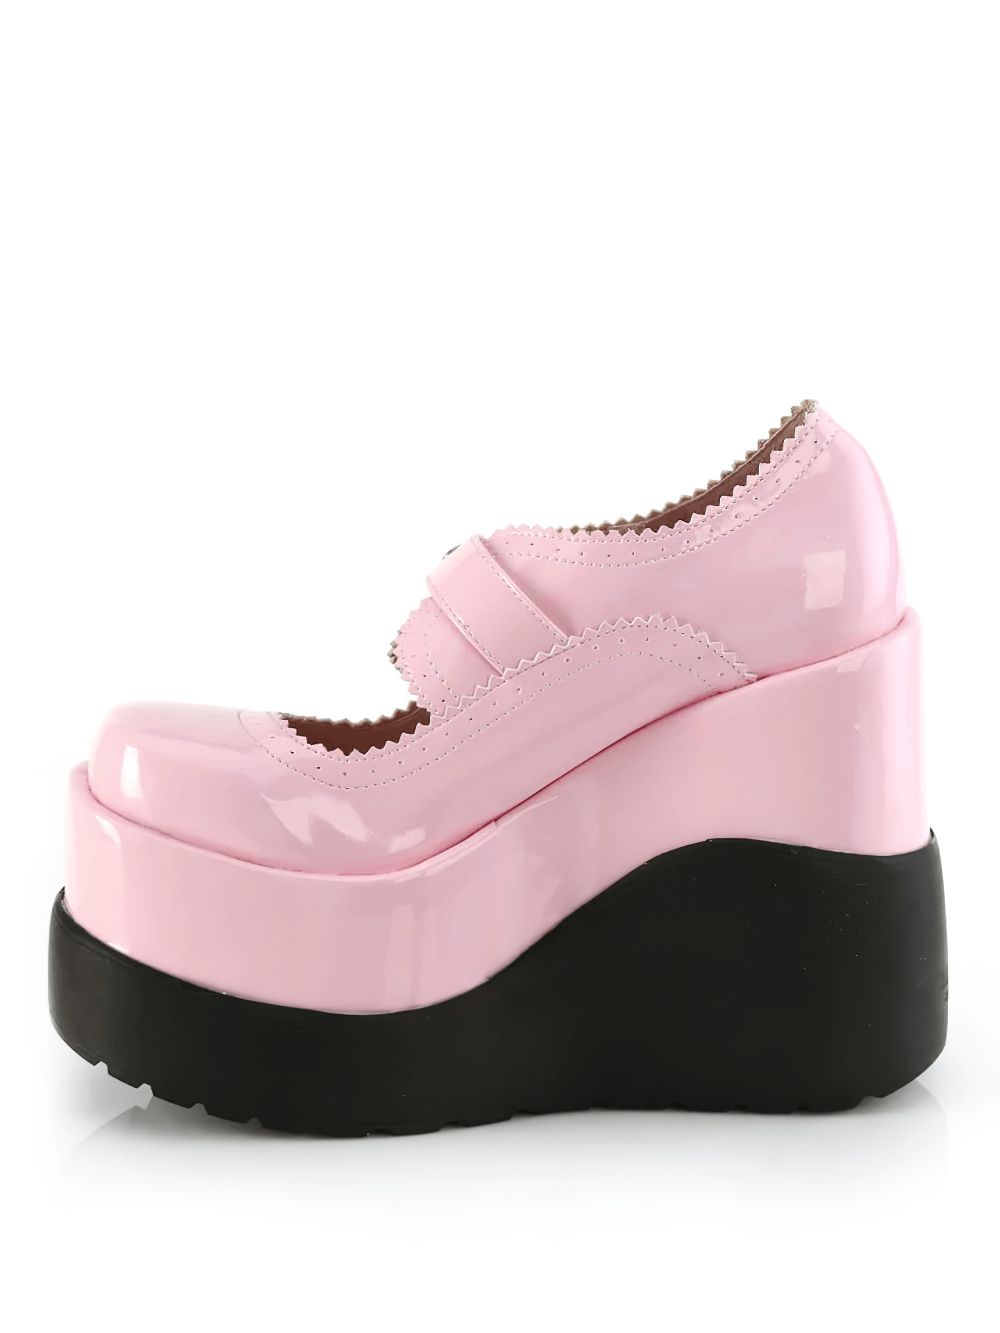 DEMONIA Pink Holographic Spider Buckle Platforms Shoes